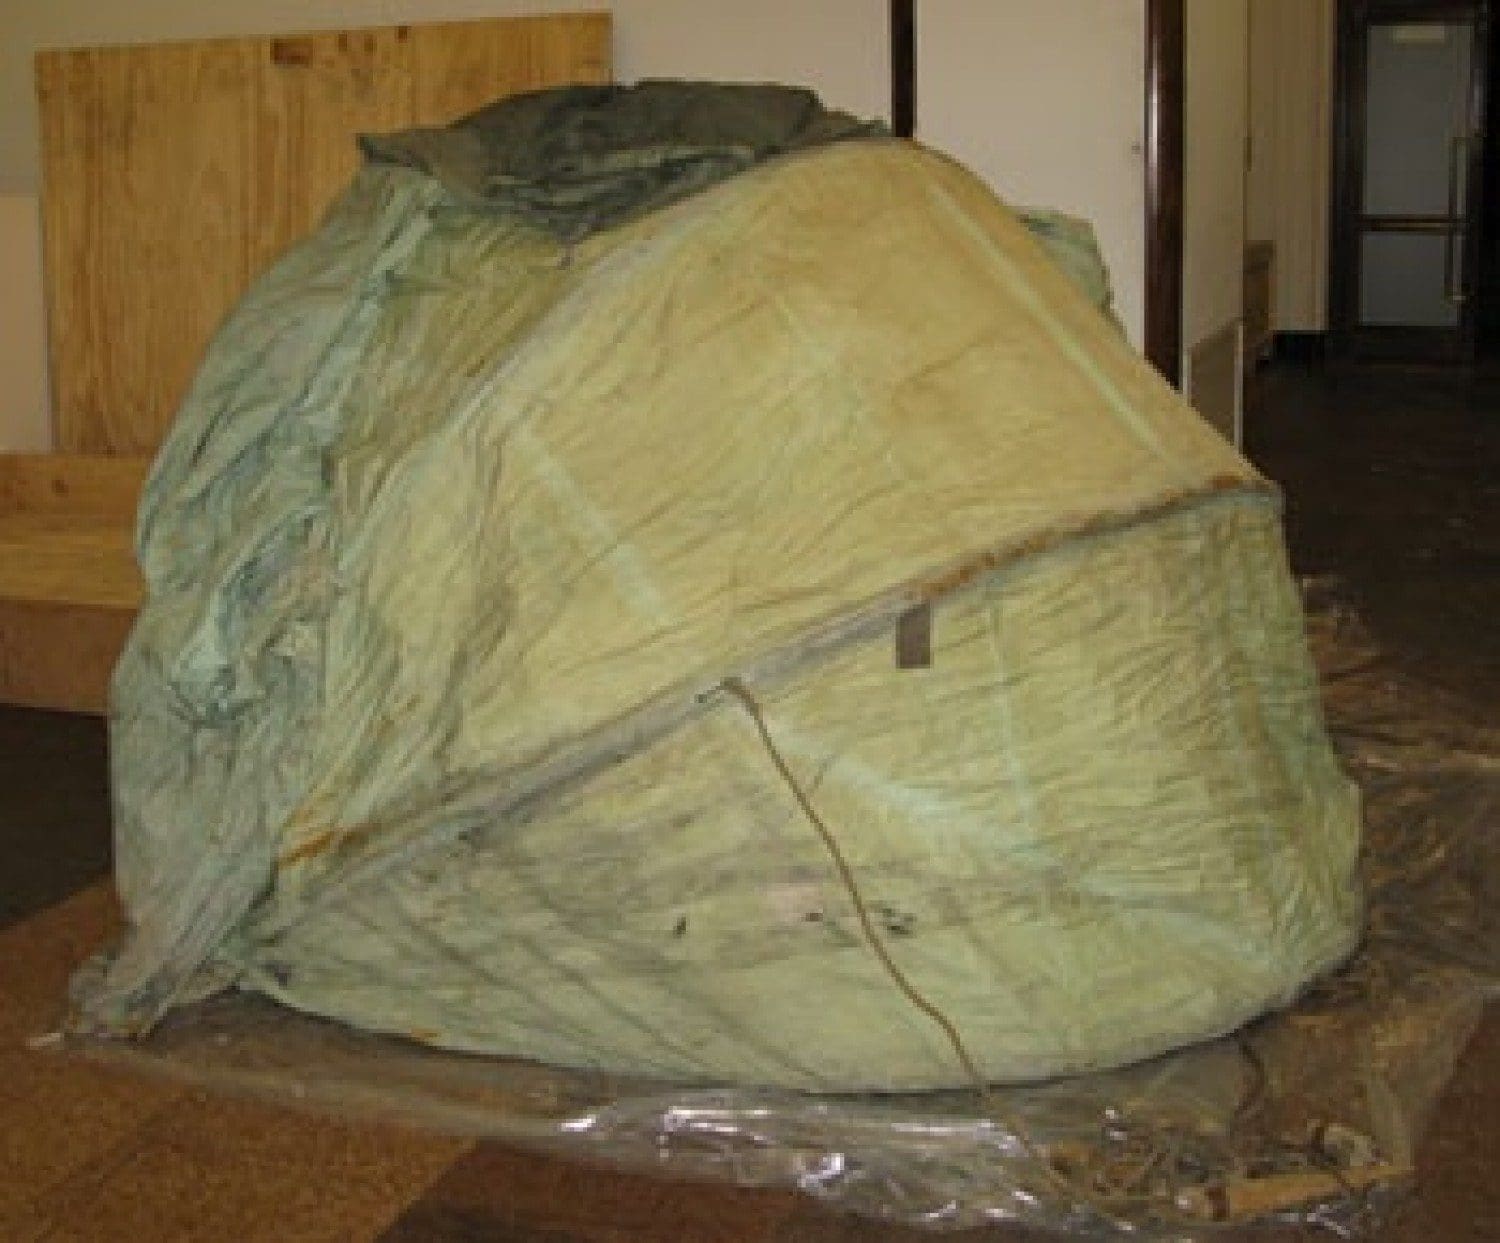 The partially opened dome tent